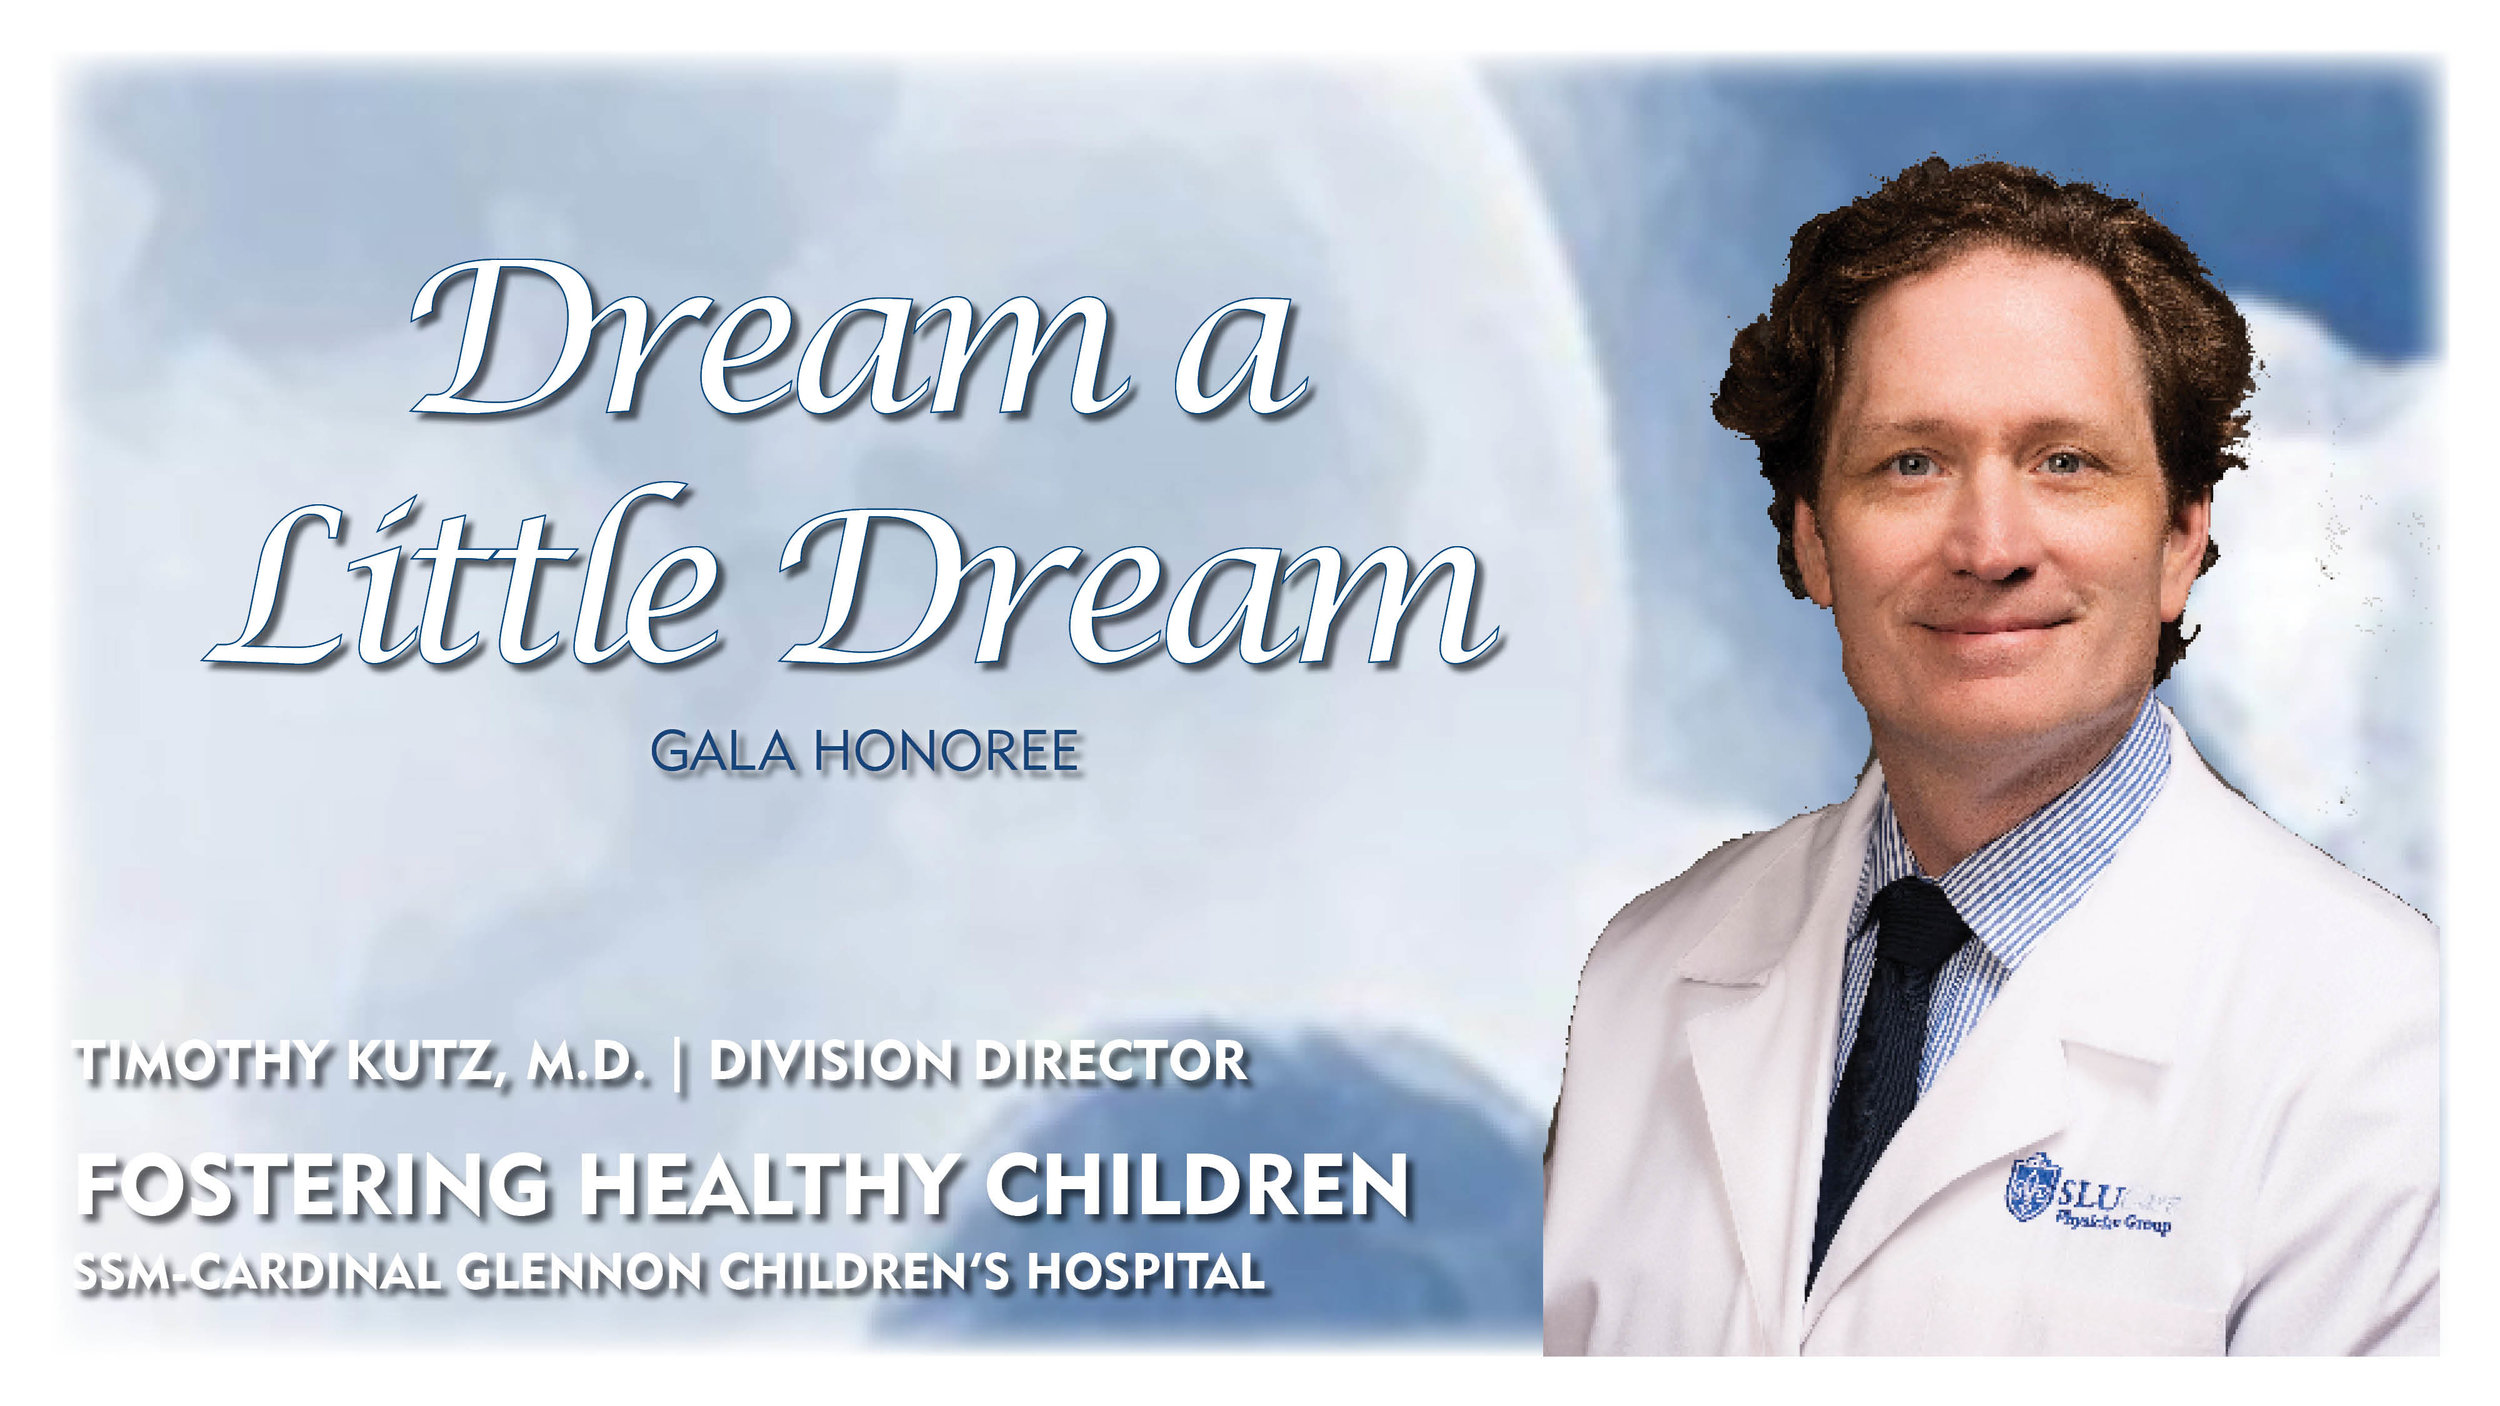  This year Voices for Children/CASA of St. Louis is proud to honor SSM-Cardinal Glennon Children’s Hospital for their Fostering Healthy Children program.  The program is led by a team of health care specialists with many years of experience in pediat